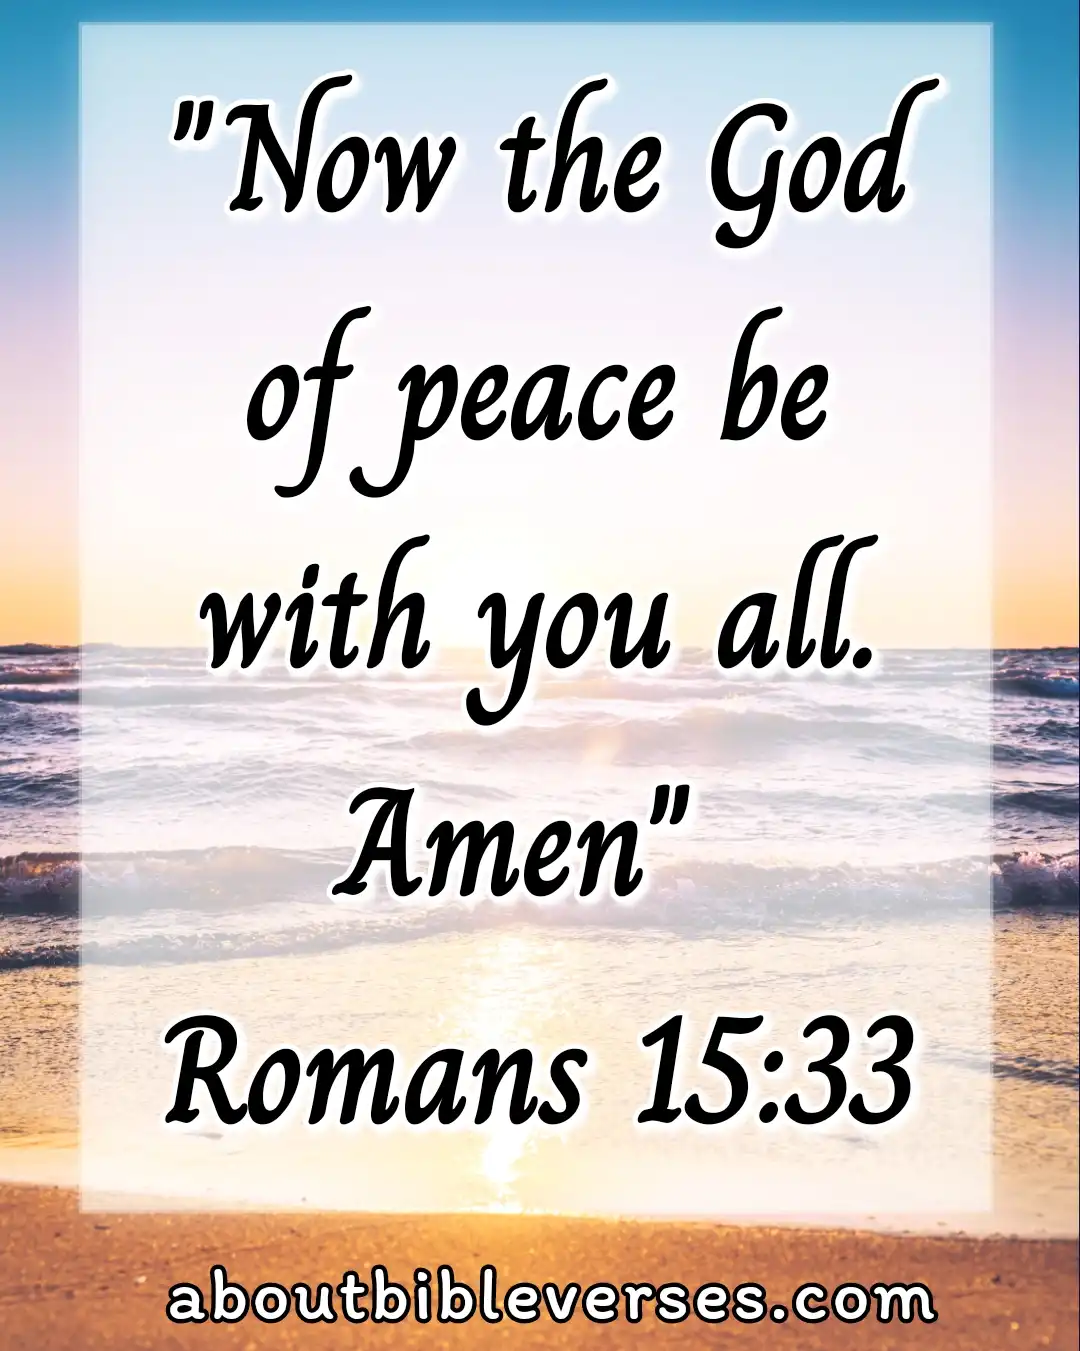 Bible Verses On Blessed Are The Peacemakers (Romans 15:33)